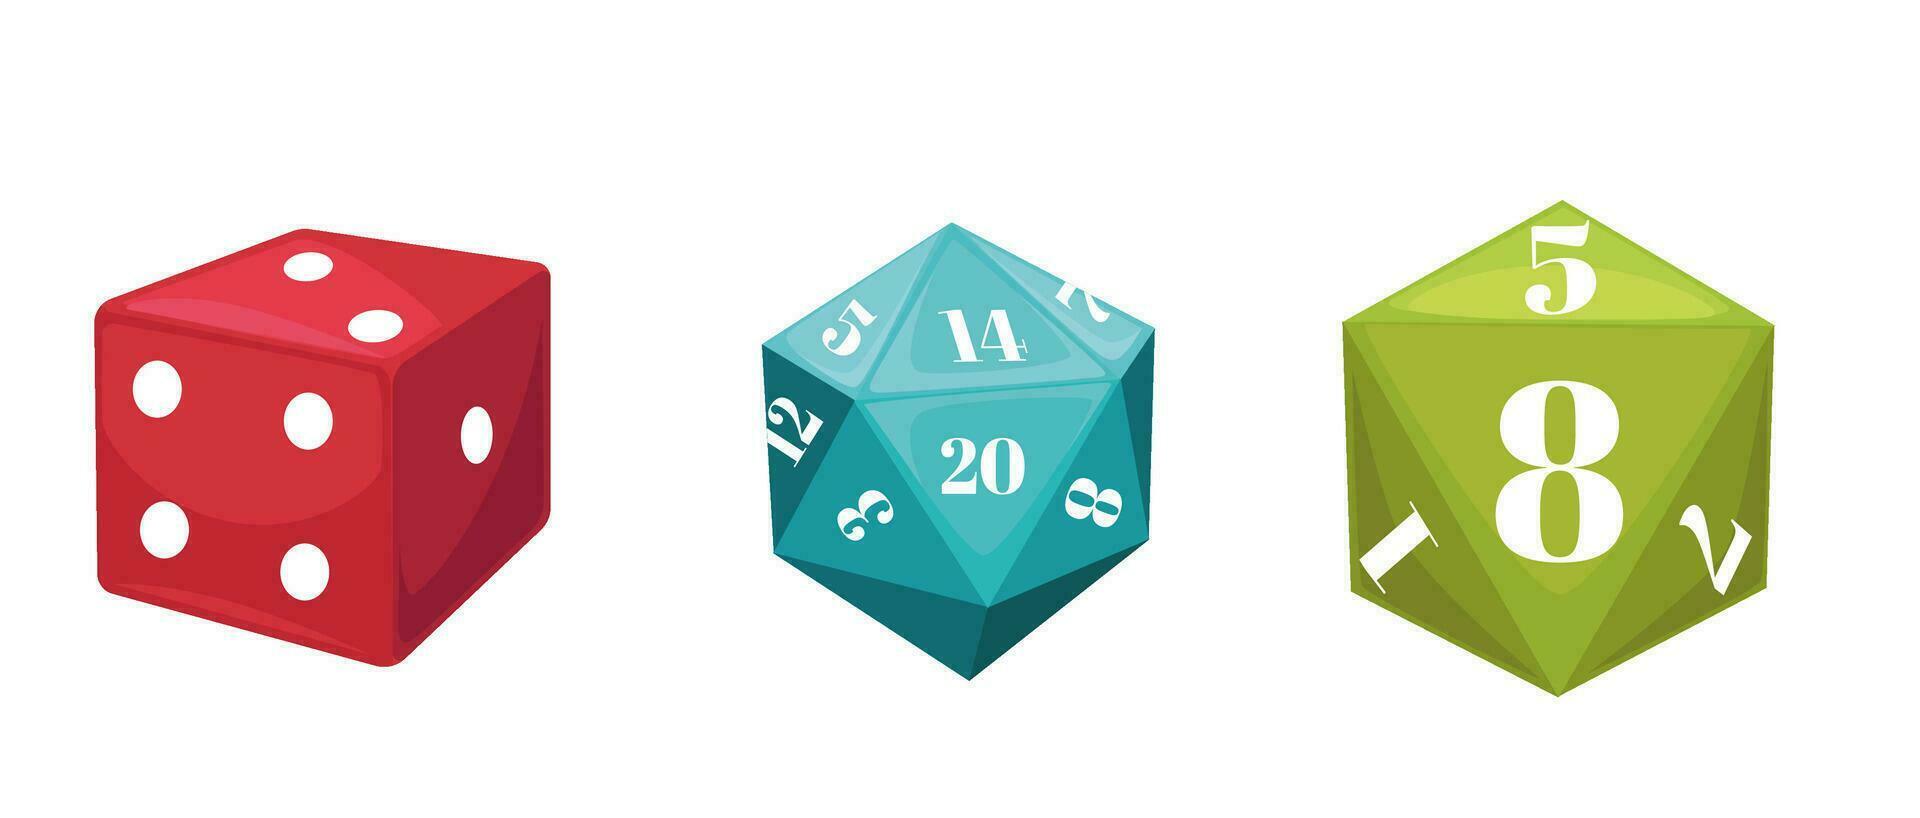 Gaming cubes for playing games, rpg and board vector